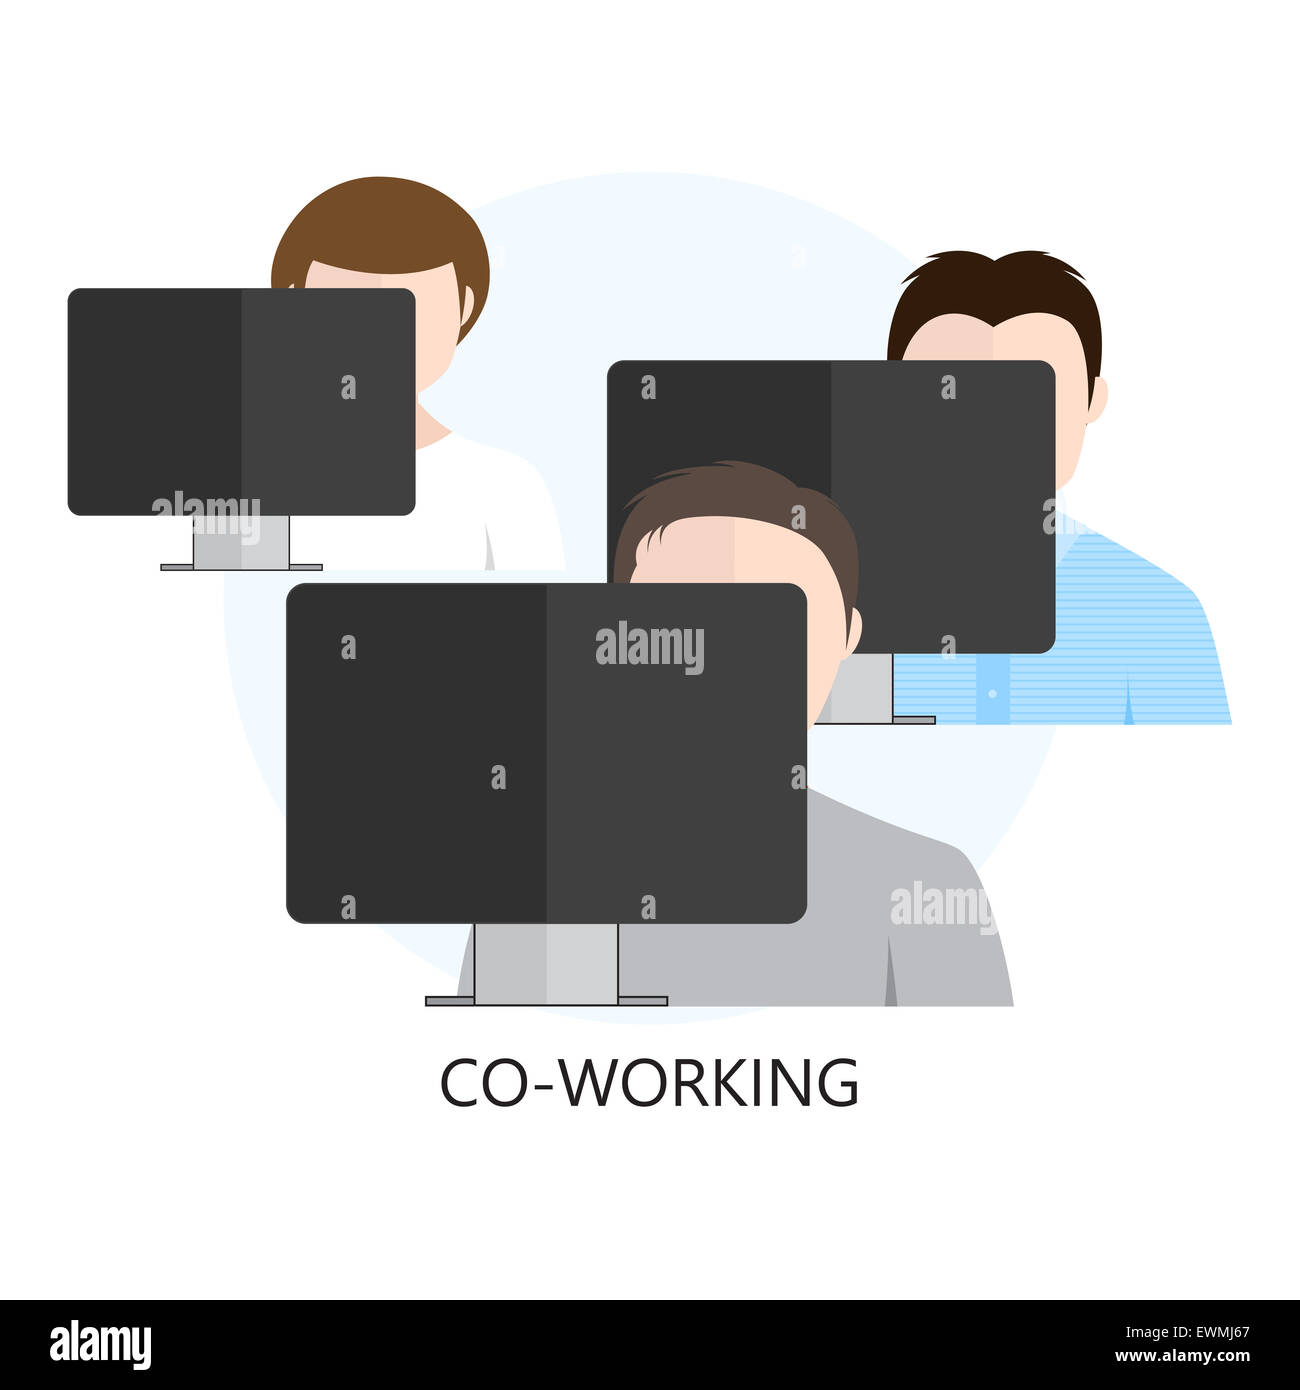 Co-working Icon with Three Workplaces Stock Photo